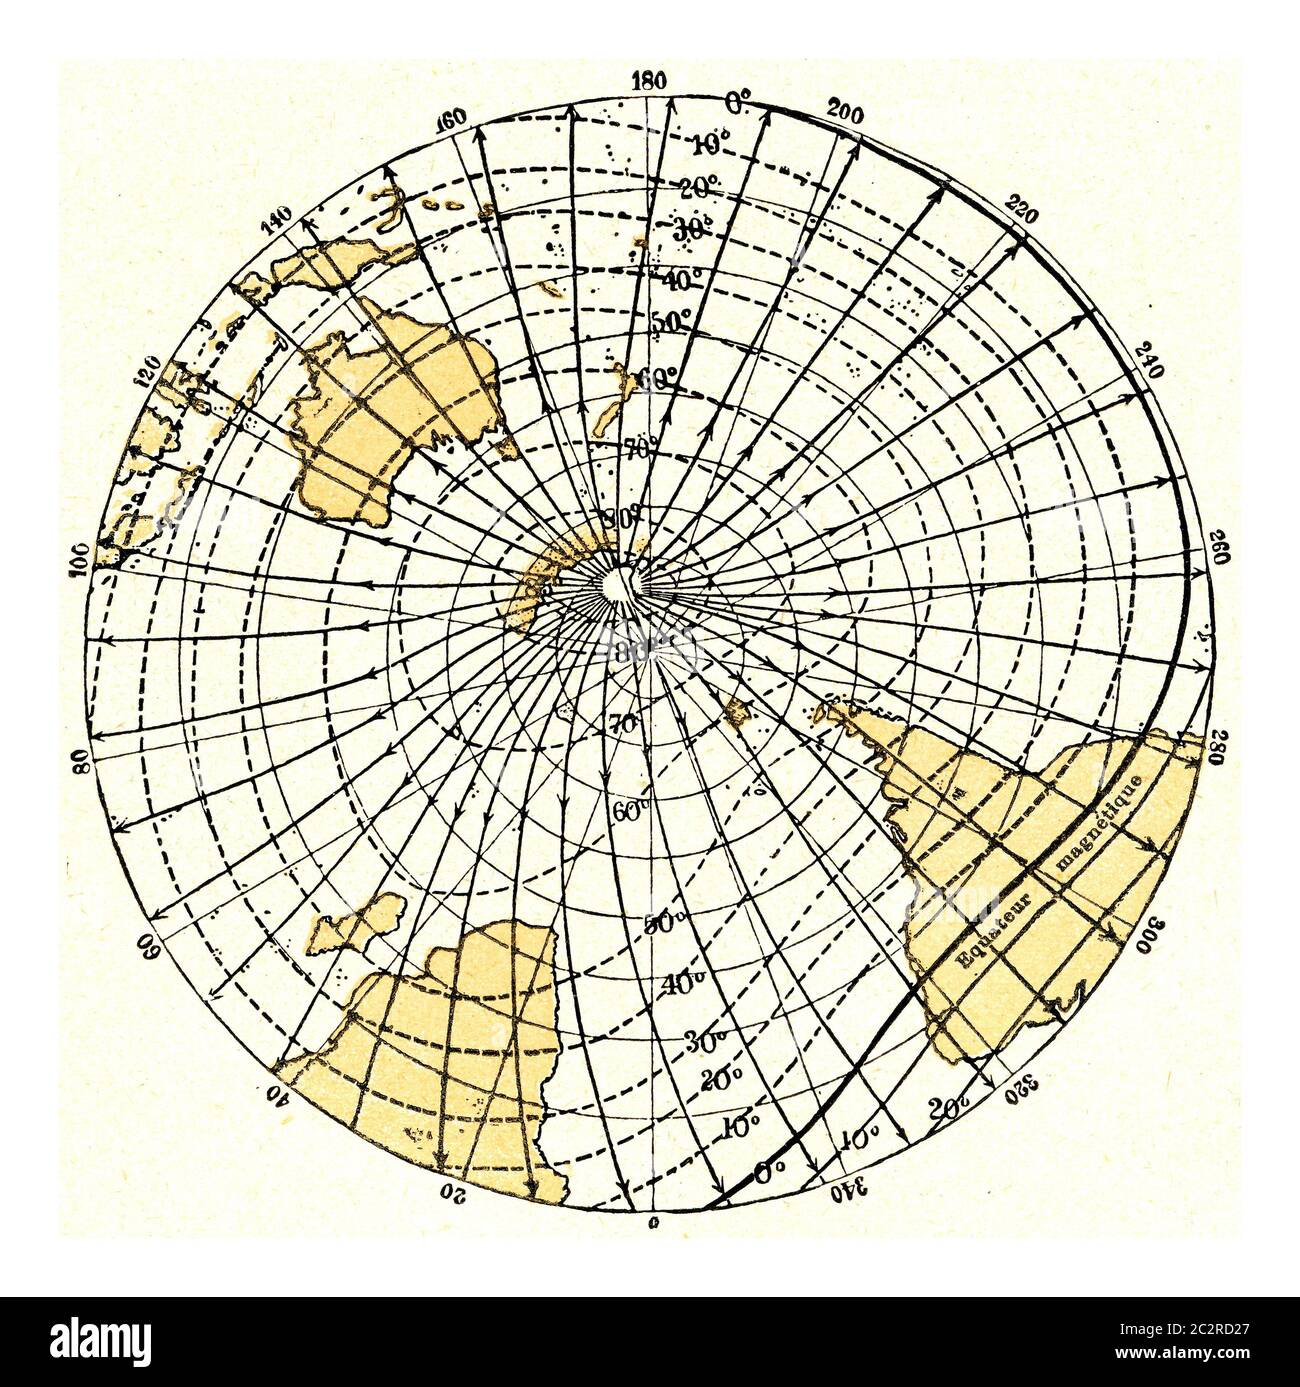 Magnetic meridians and isoclines or lines of equal magnetic inclination, vintage engraved illustration. From the Universe and Humanity, 1910. Stock Photo